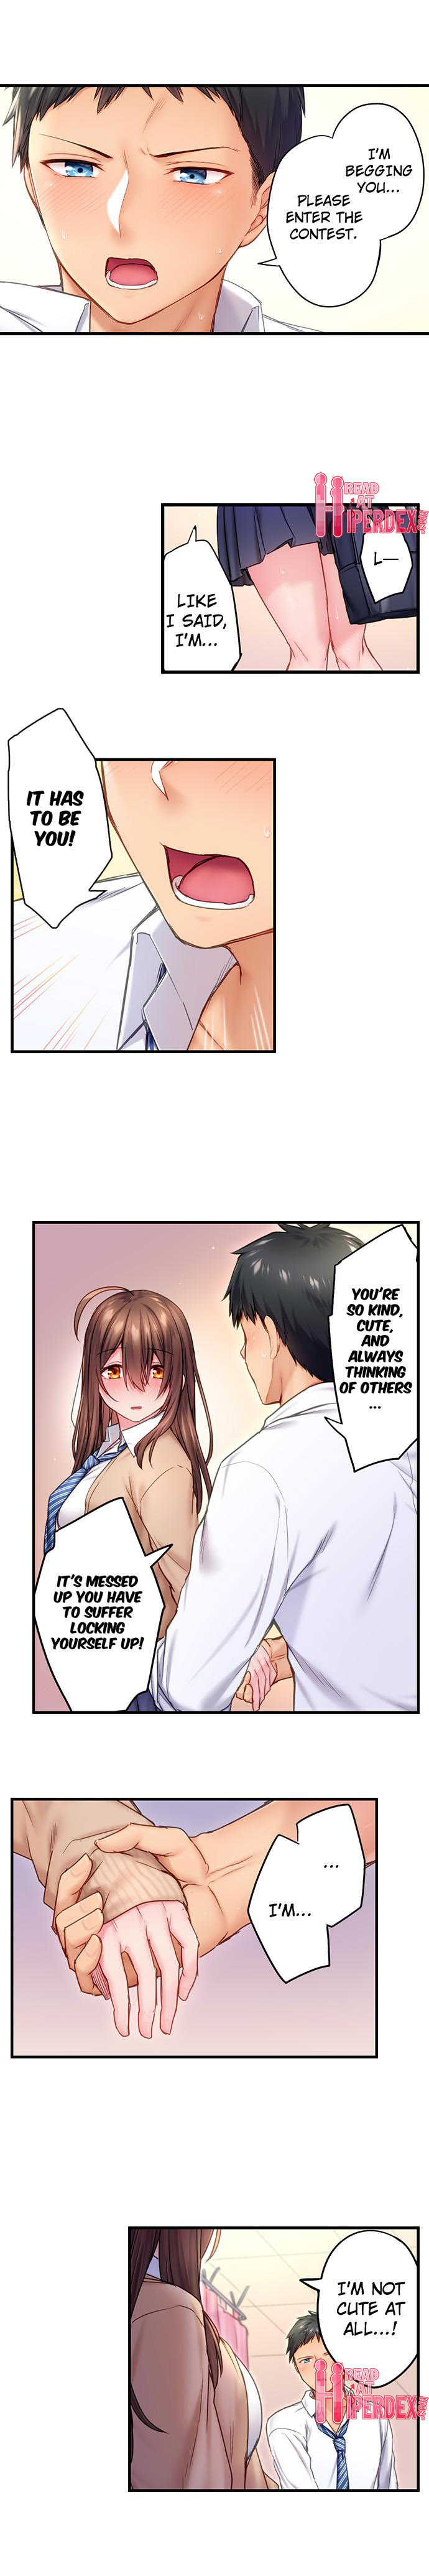 Can’t Believe My Loner Childhood Friend Became This Sexy Girl - Chapter 7 Page 9